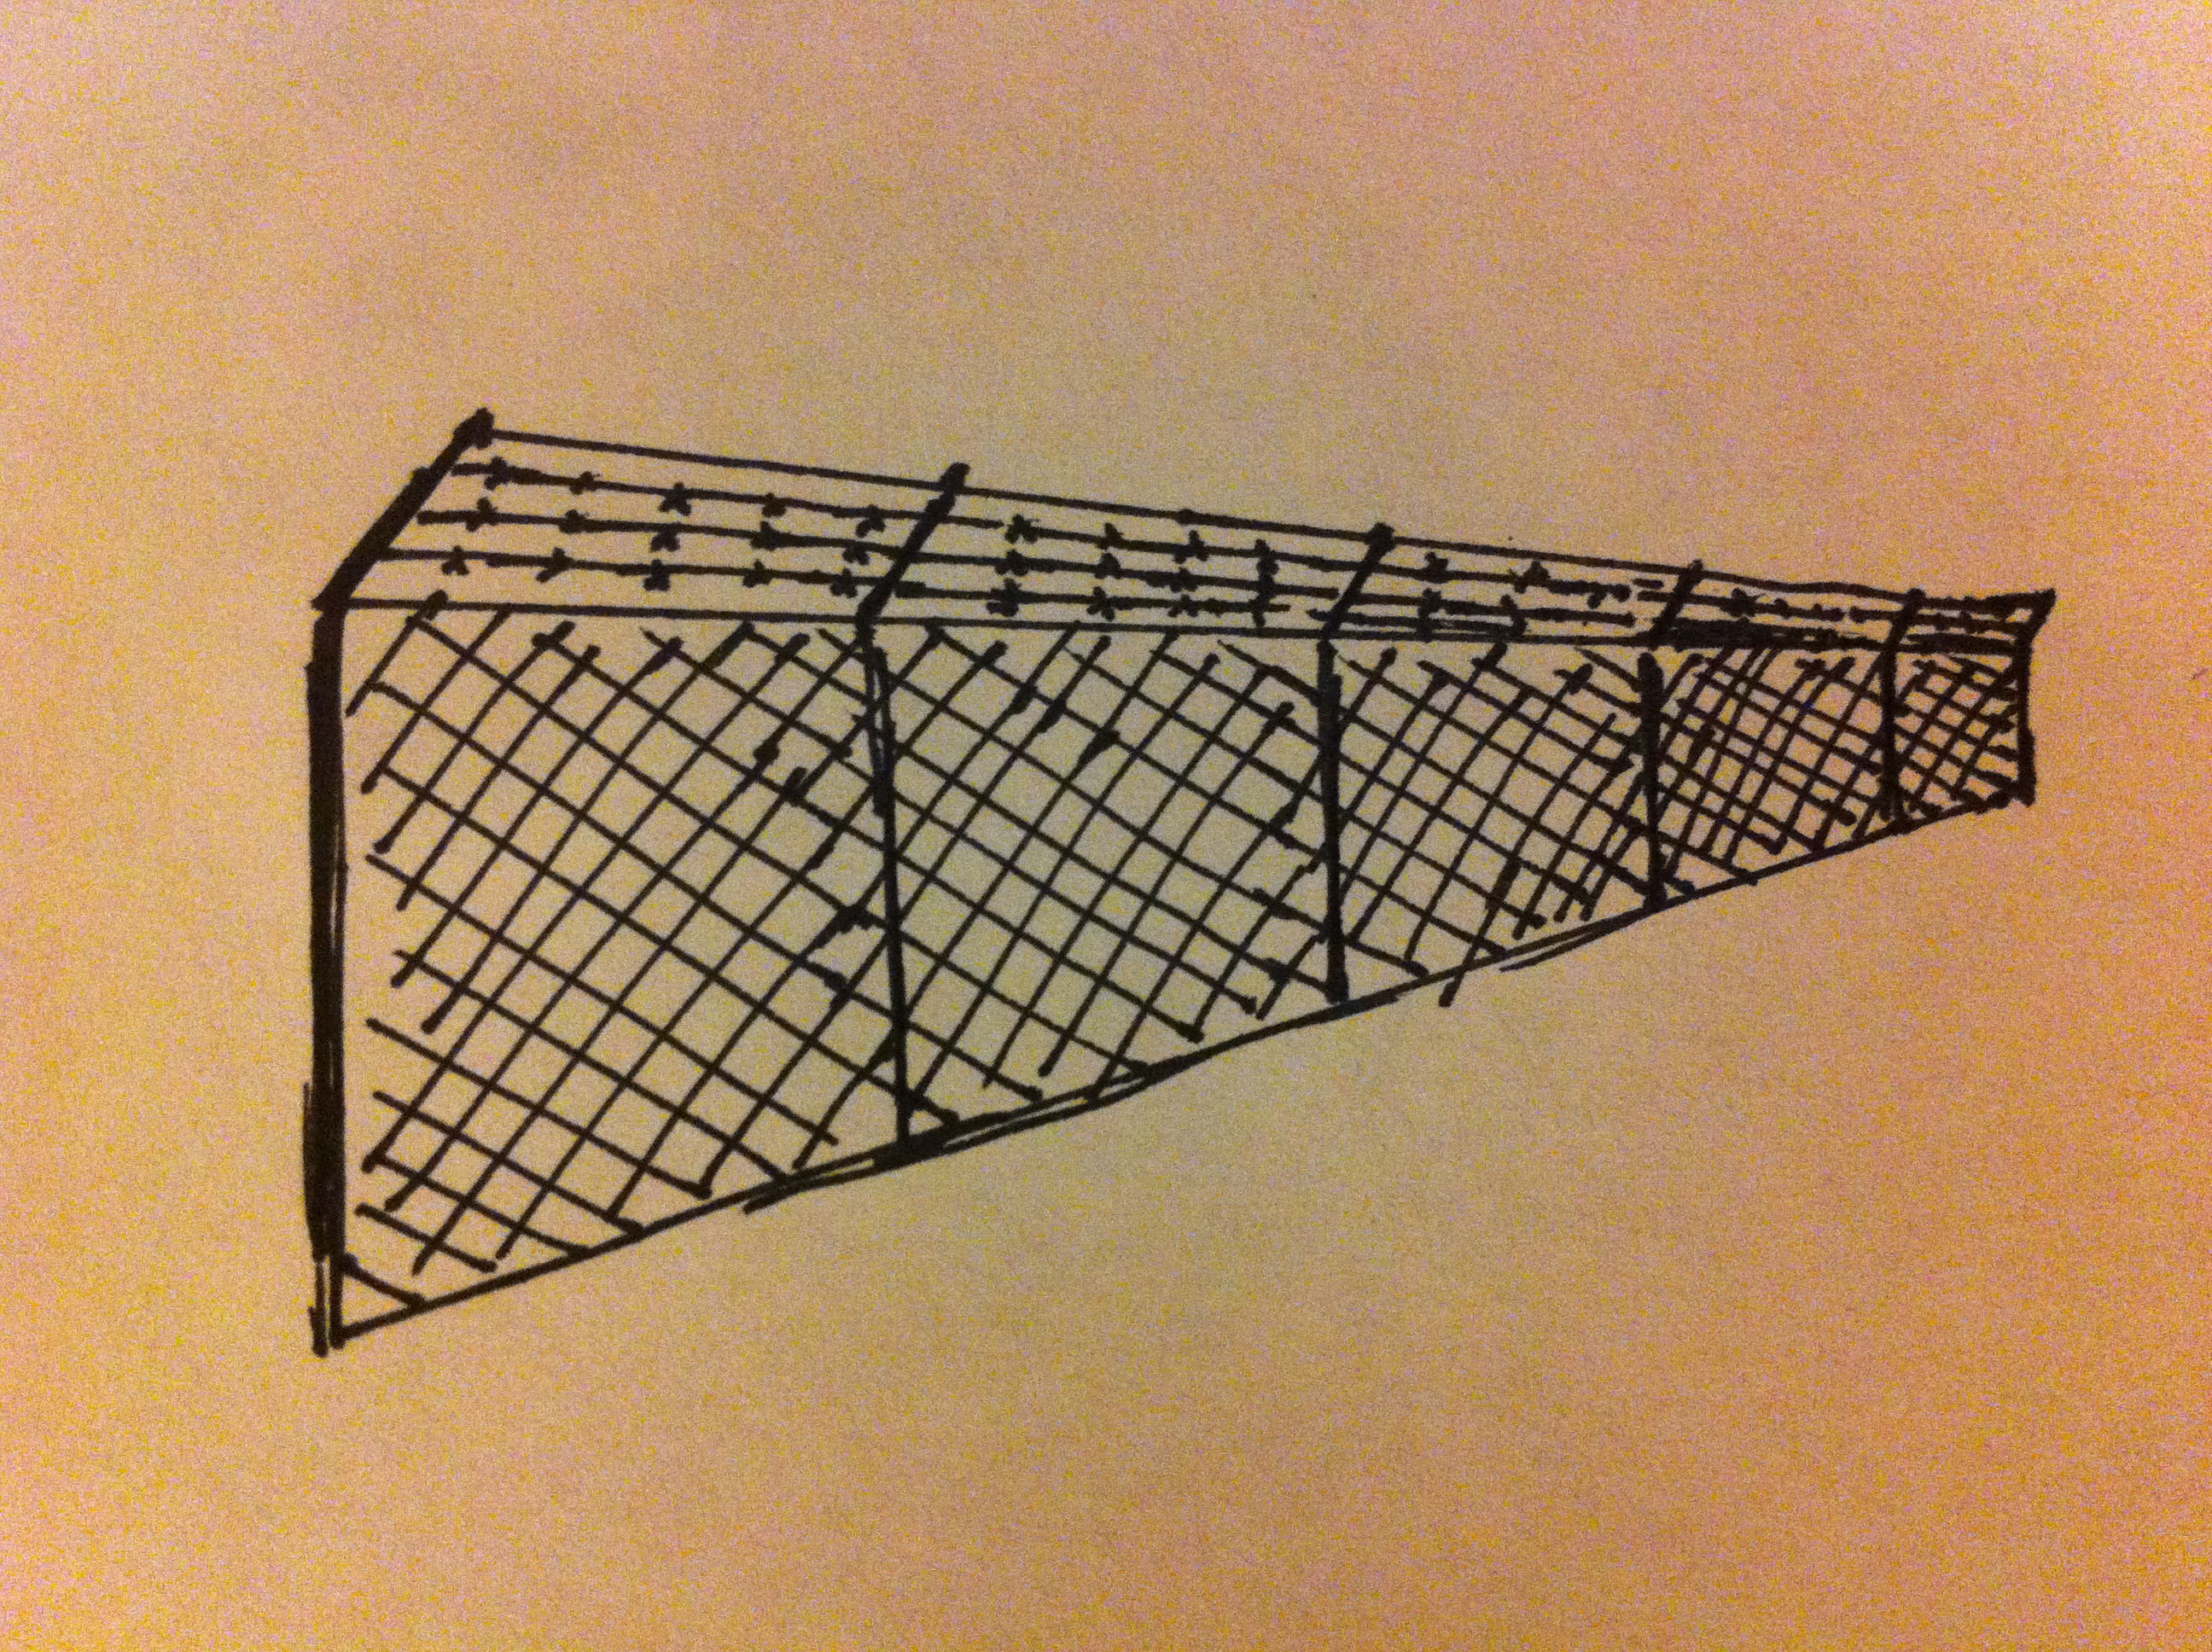 Chain Link Fence Sketch at Explore collection of